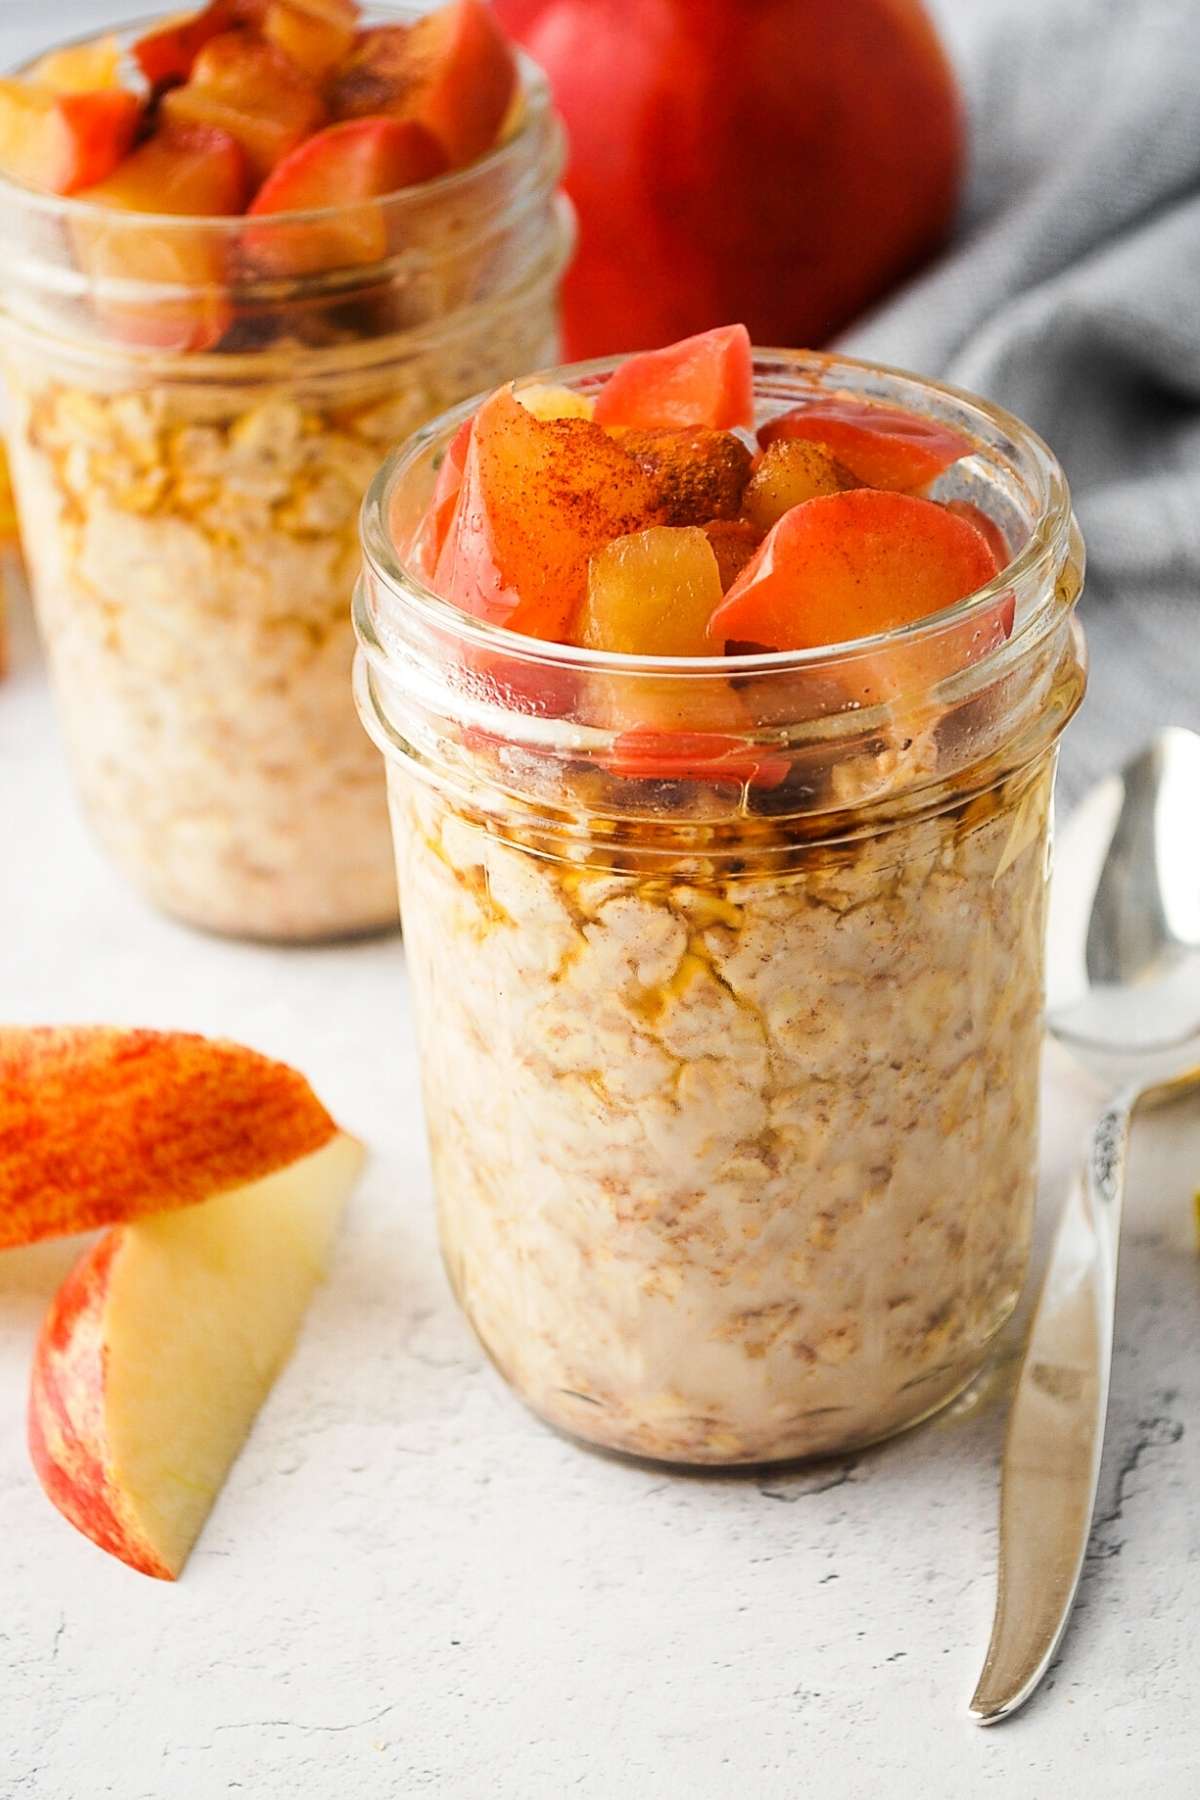 These tasty Apple Pie Overnight Oats are made with perfectly cooked apples, cinnamon, oats, and natural sweetener -a simple, nutritious, and delicious way to start the day! via @Ameessavorydish